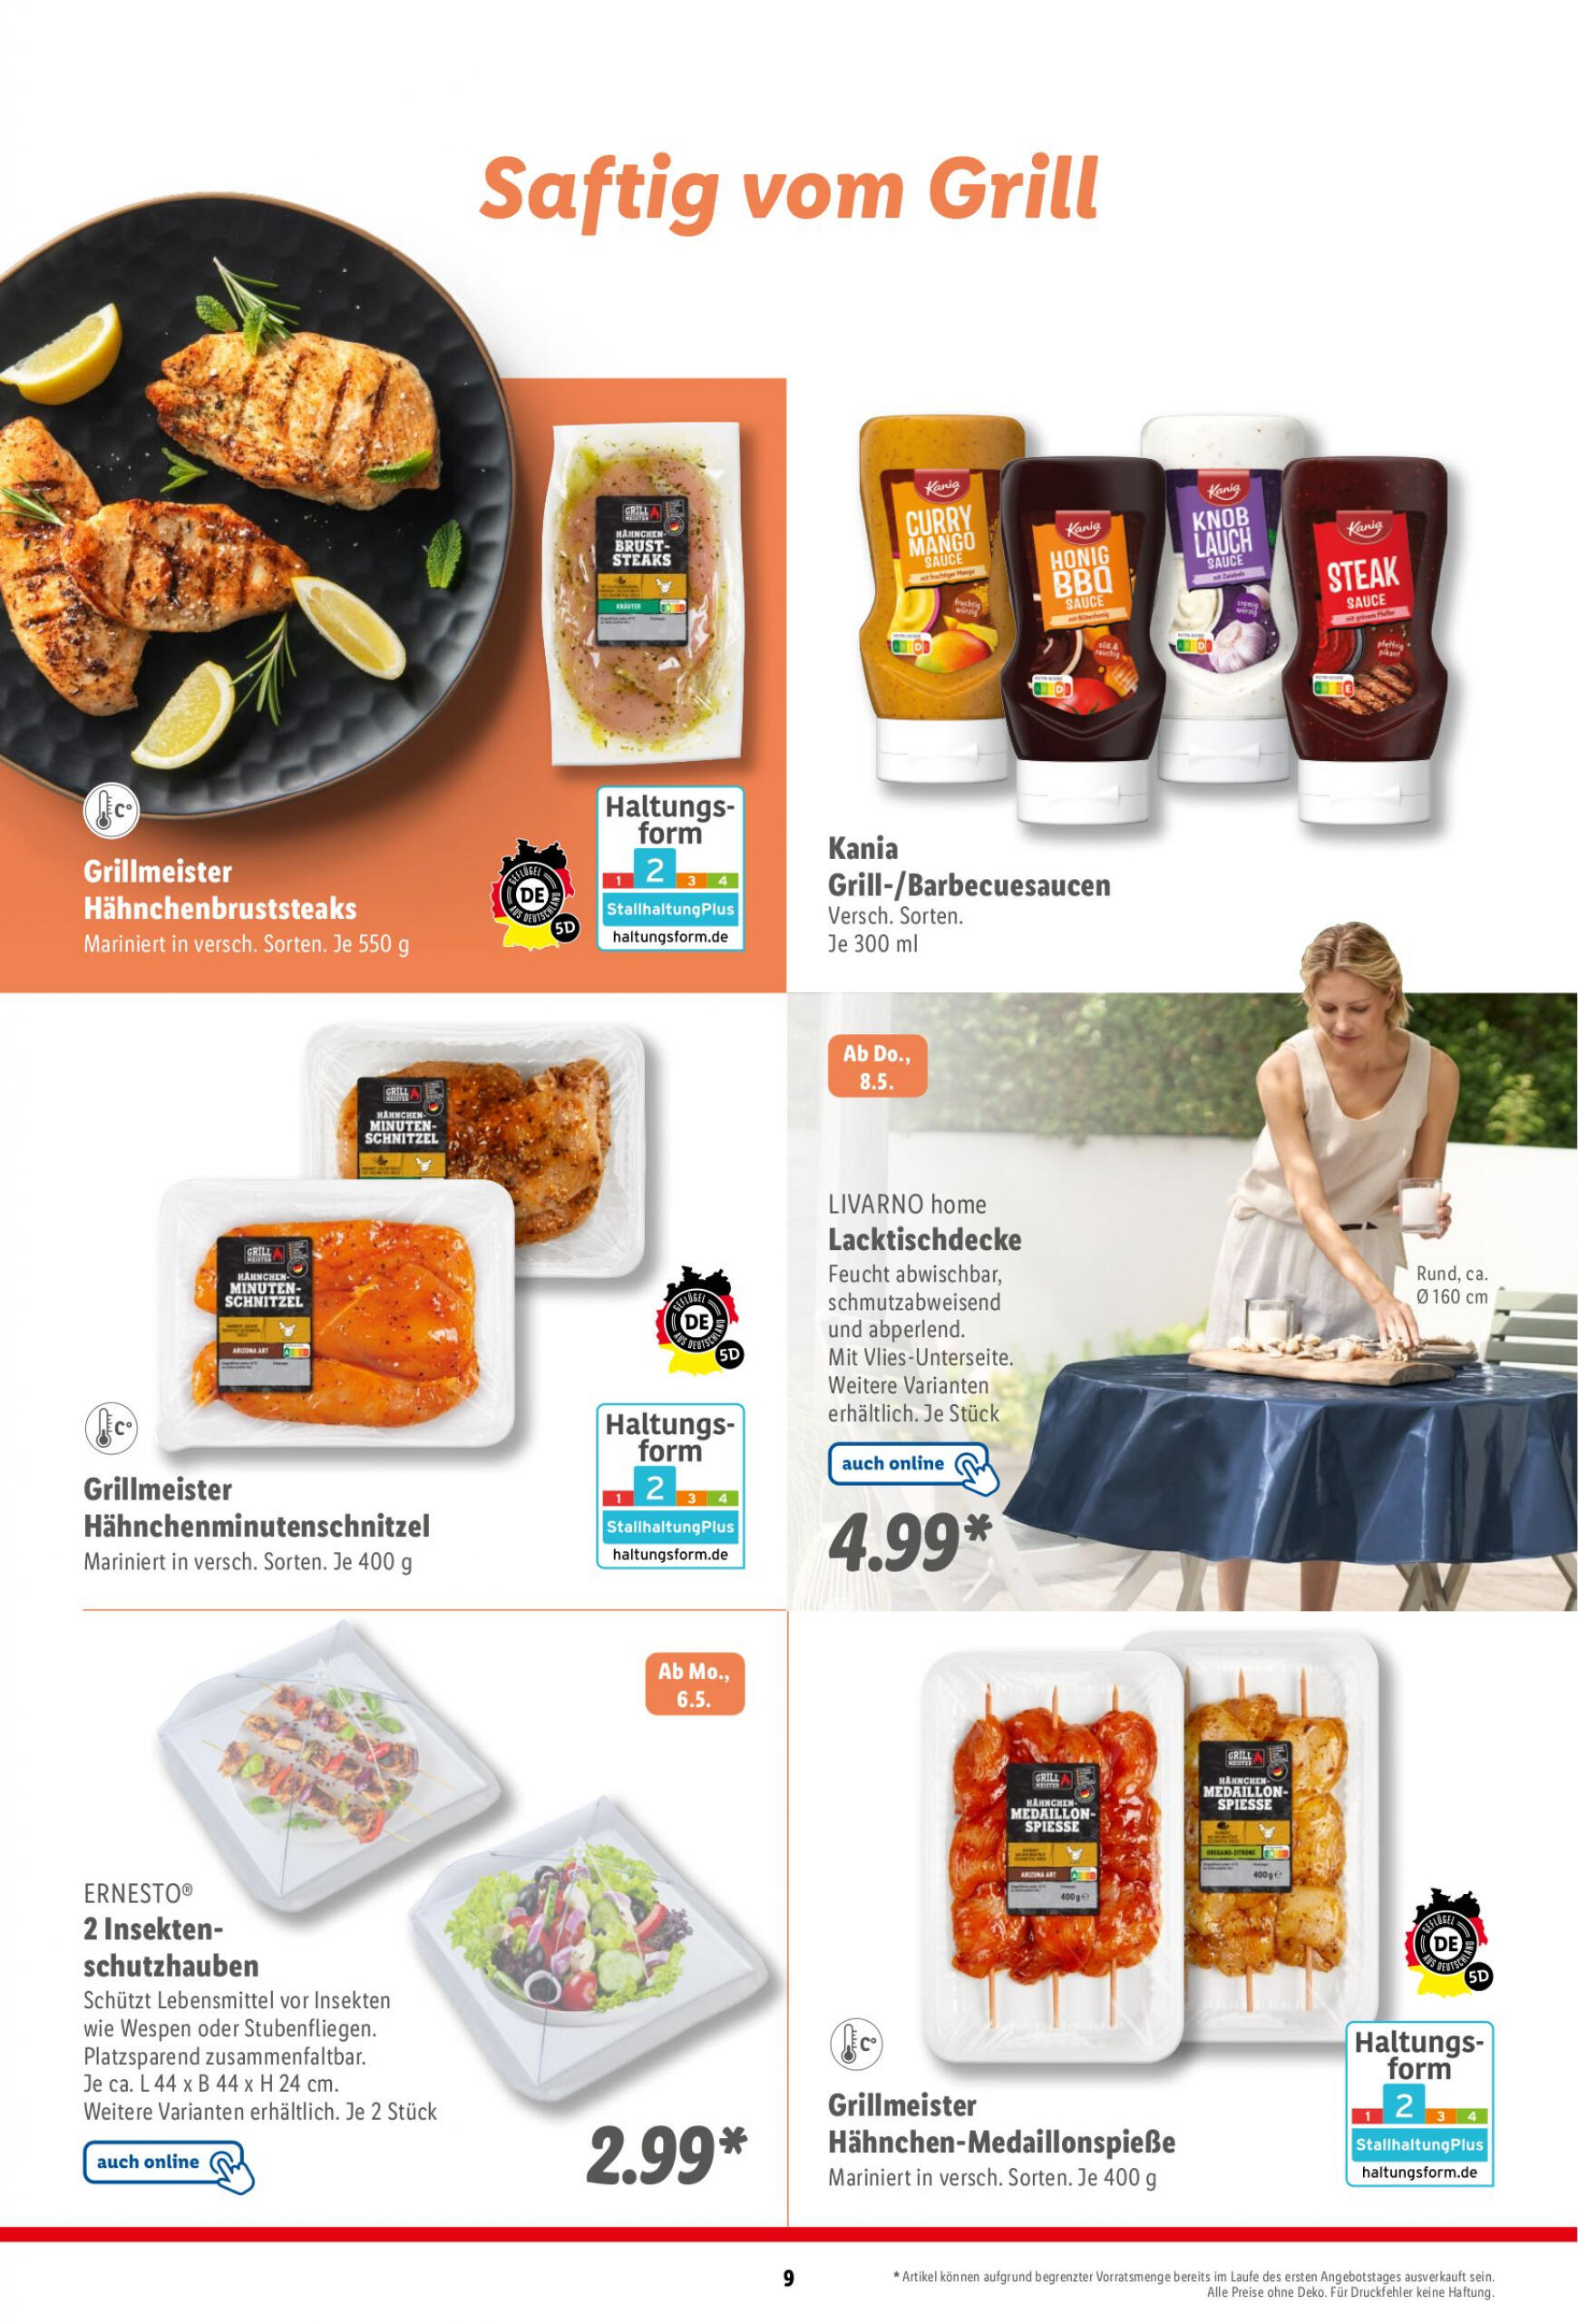 lidl - Flyer Lidl - Grillmagazin aktuell 22.04. - 30.06. - page: 9